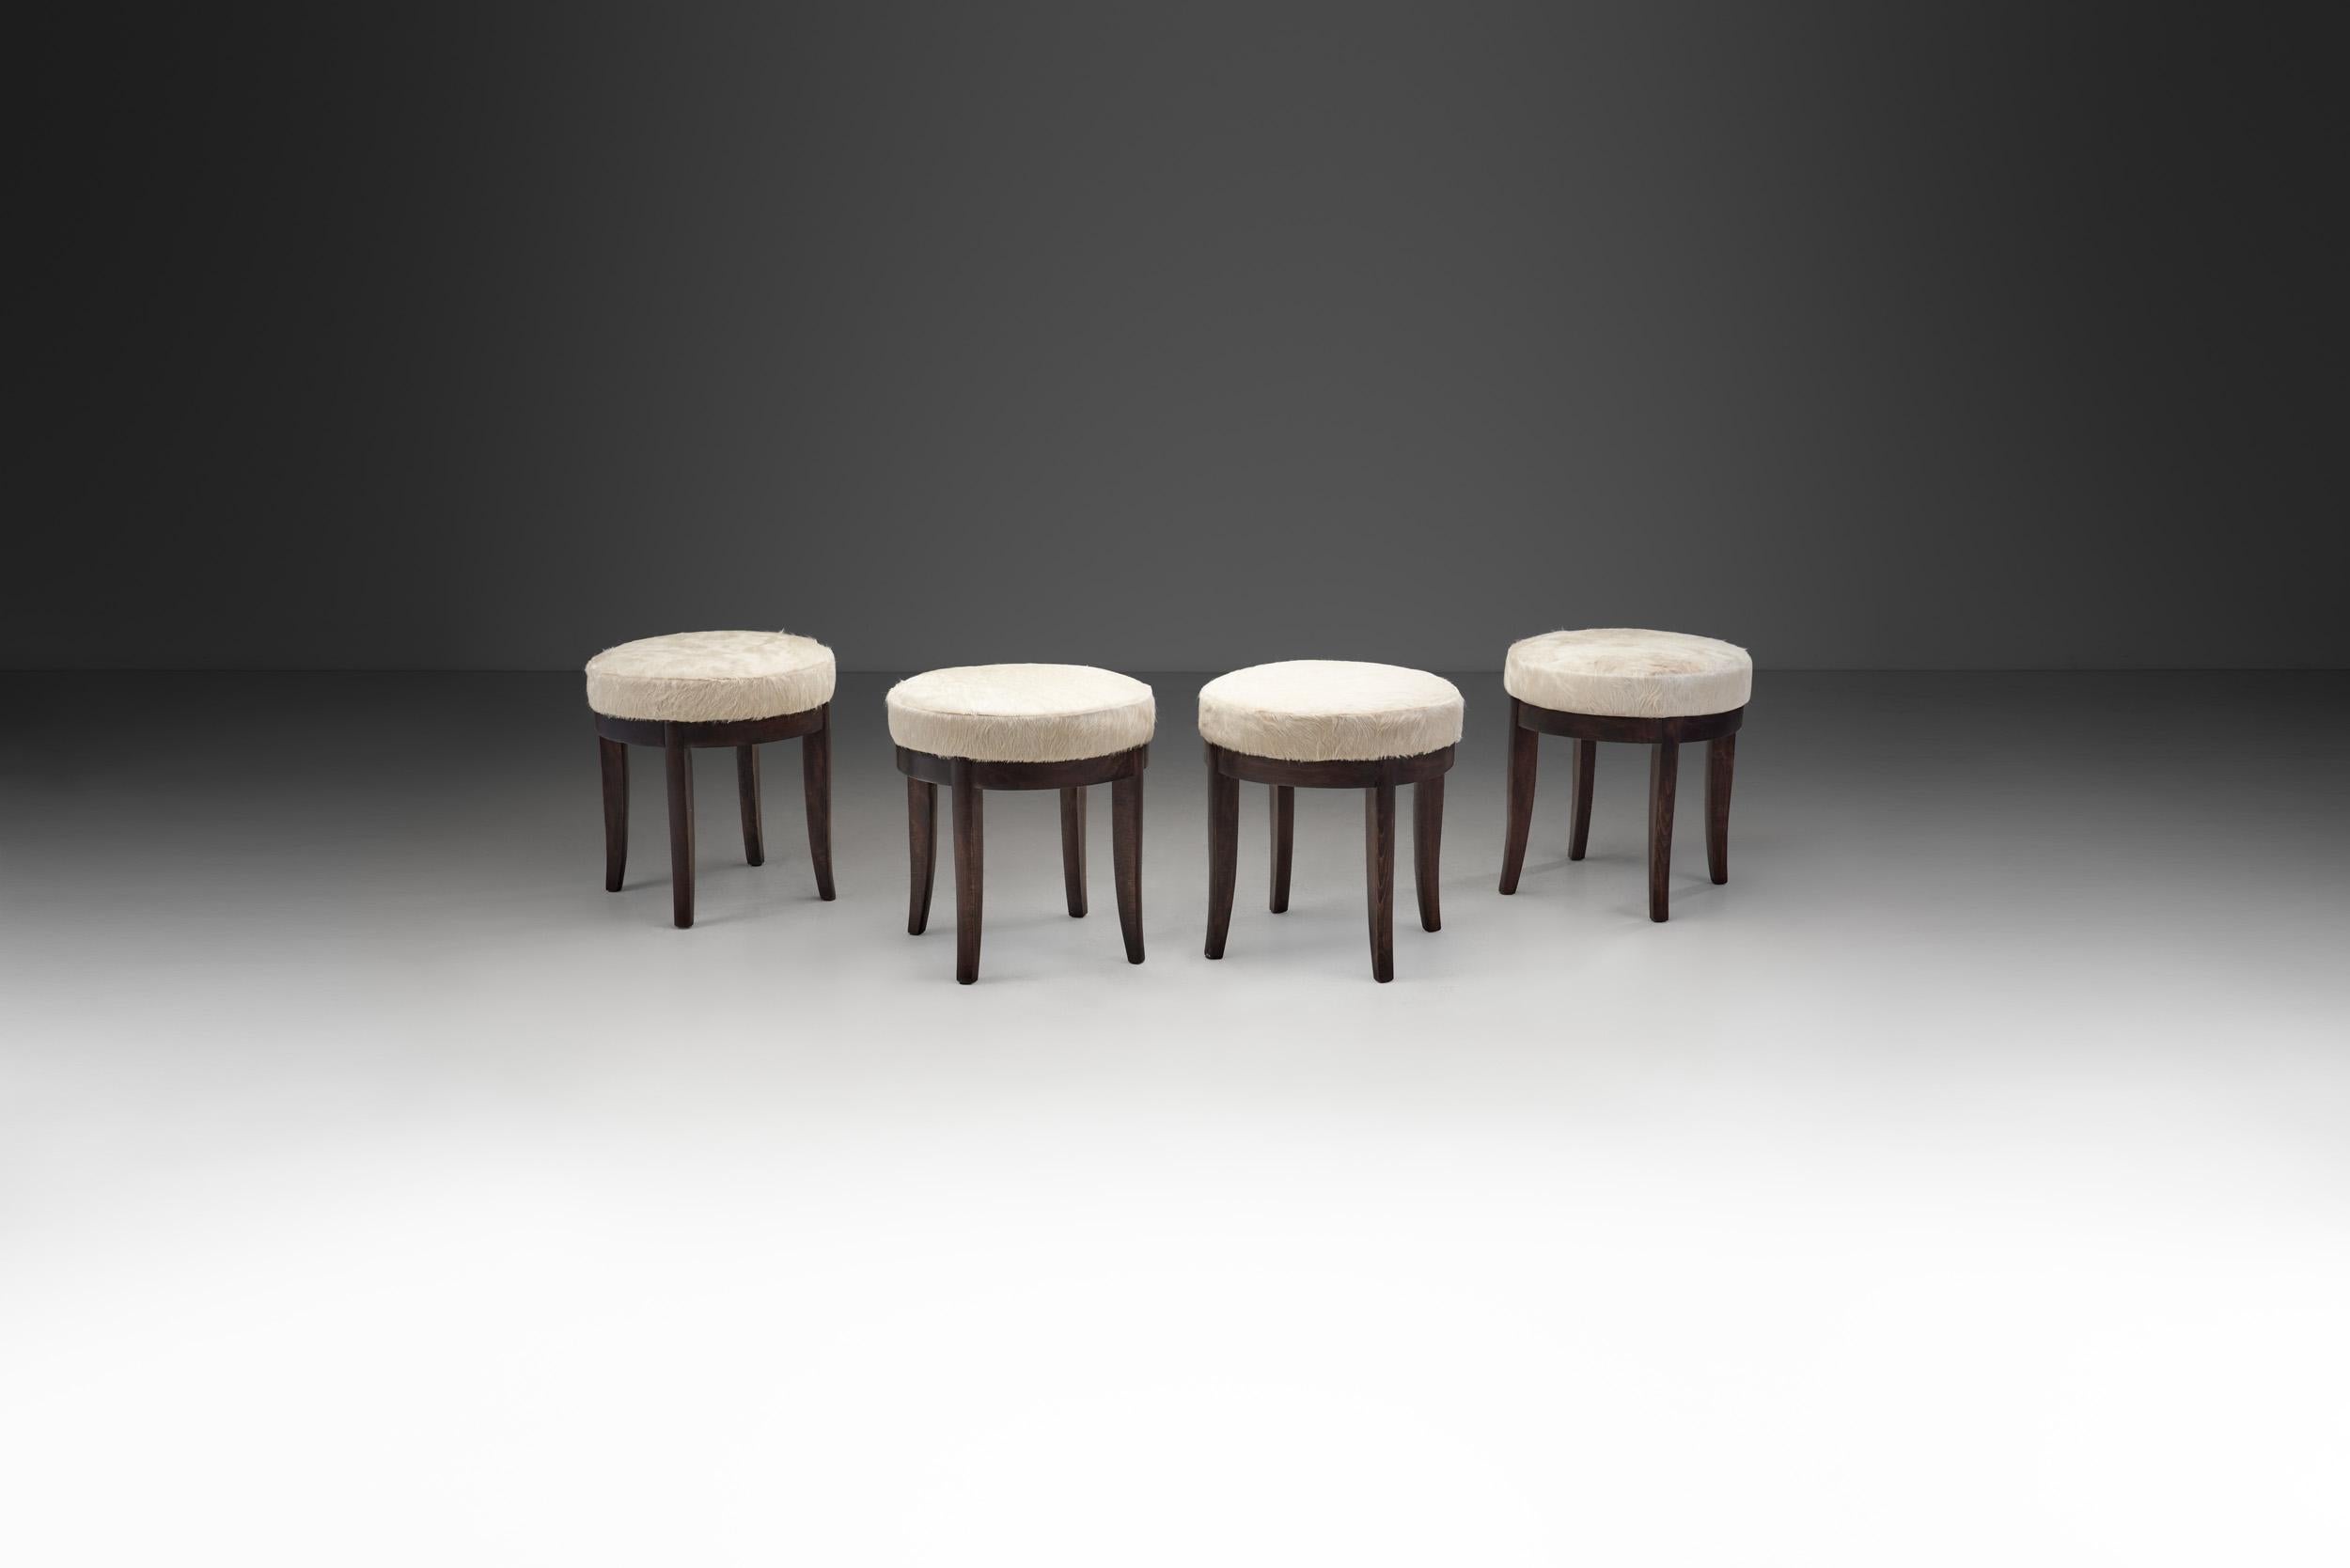 European Mid-Century Modern Set of Four Stools in Cowhide, Europe, ca 1950s For Sale